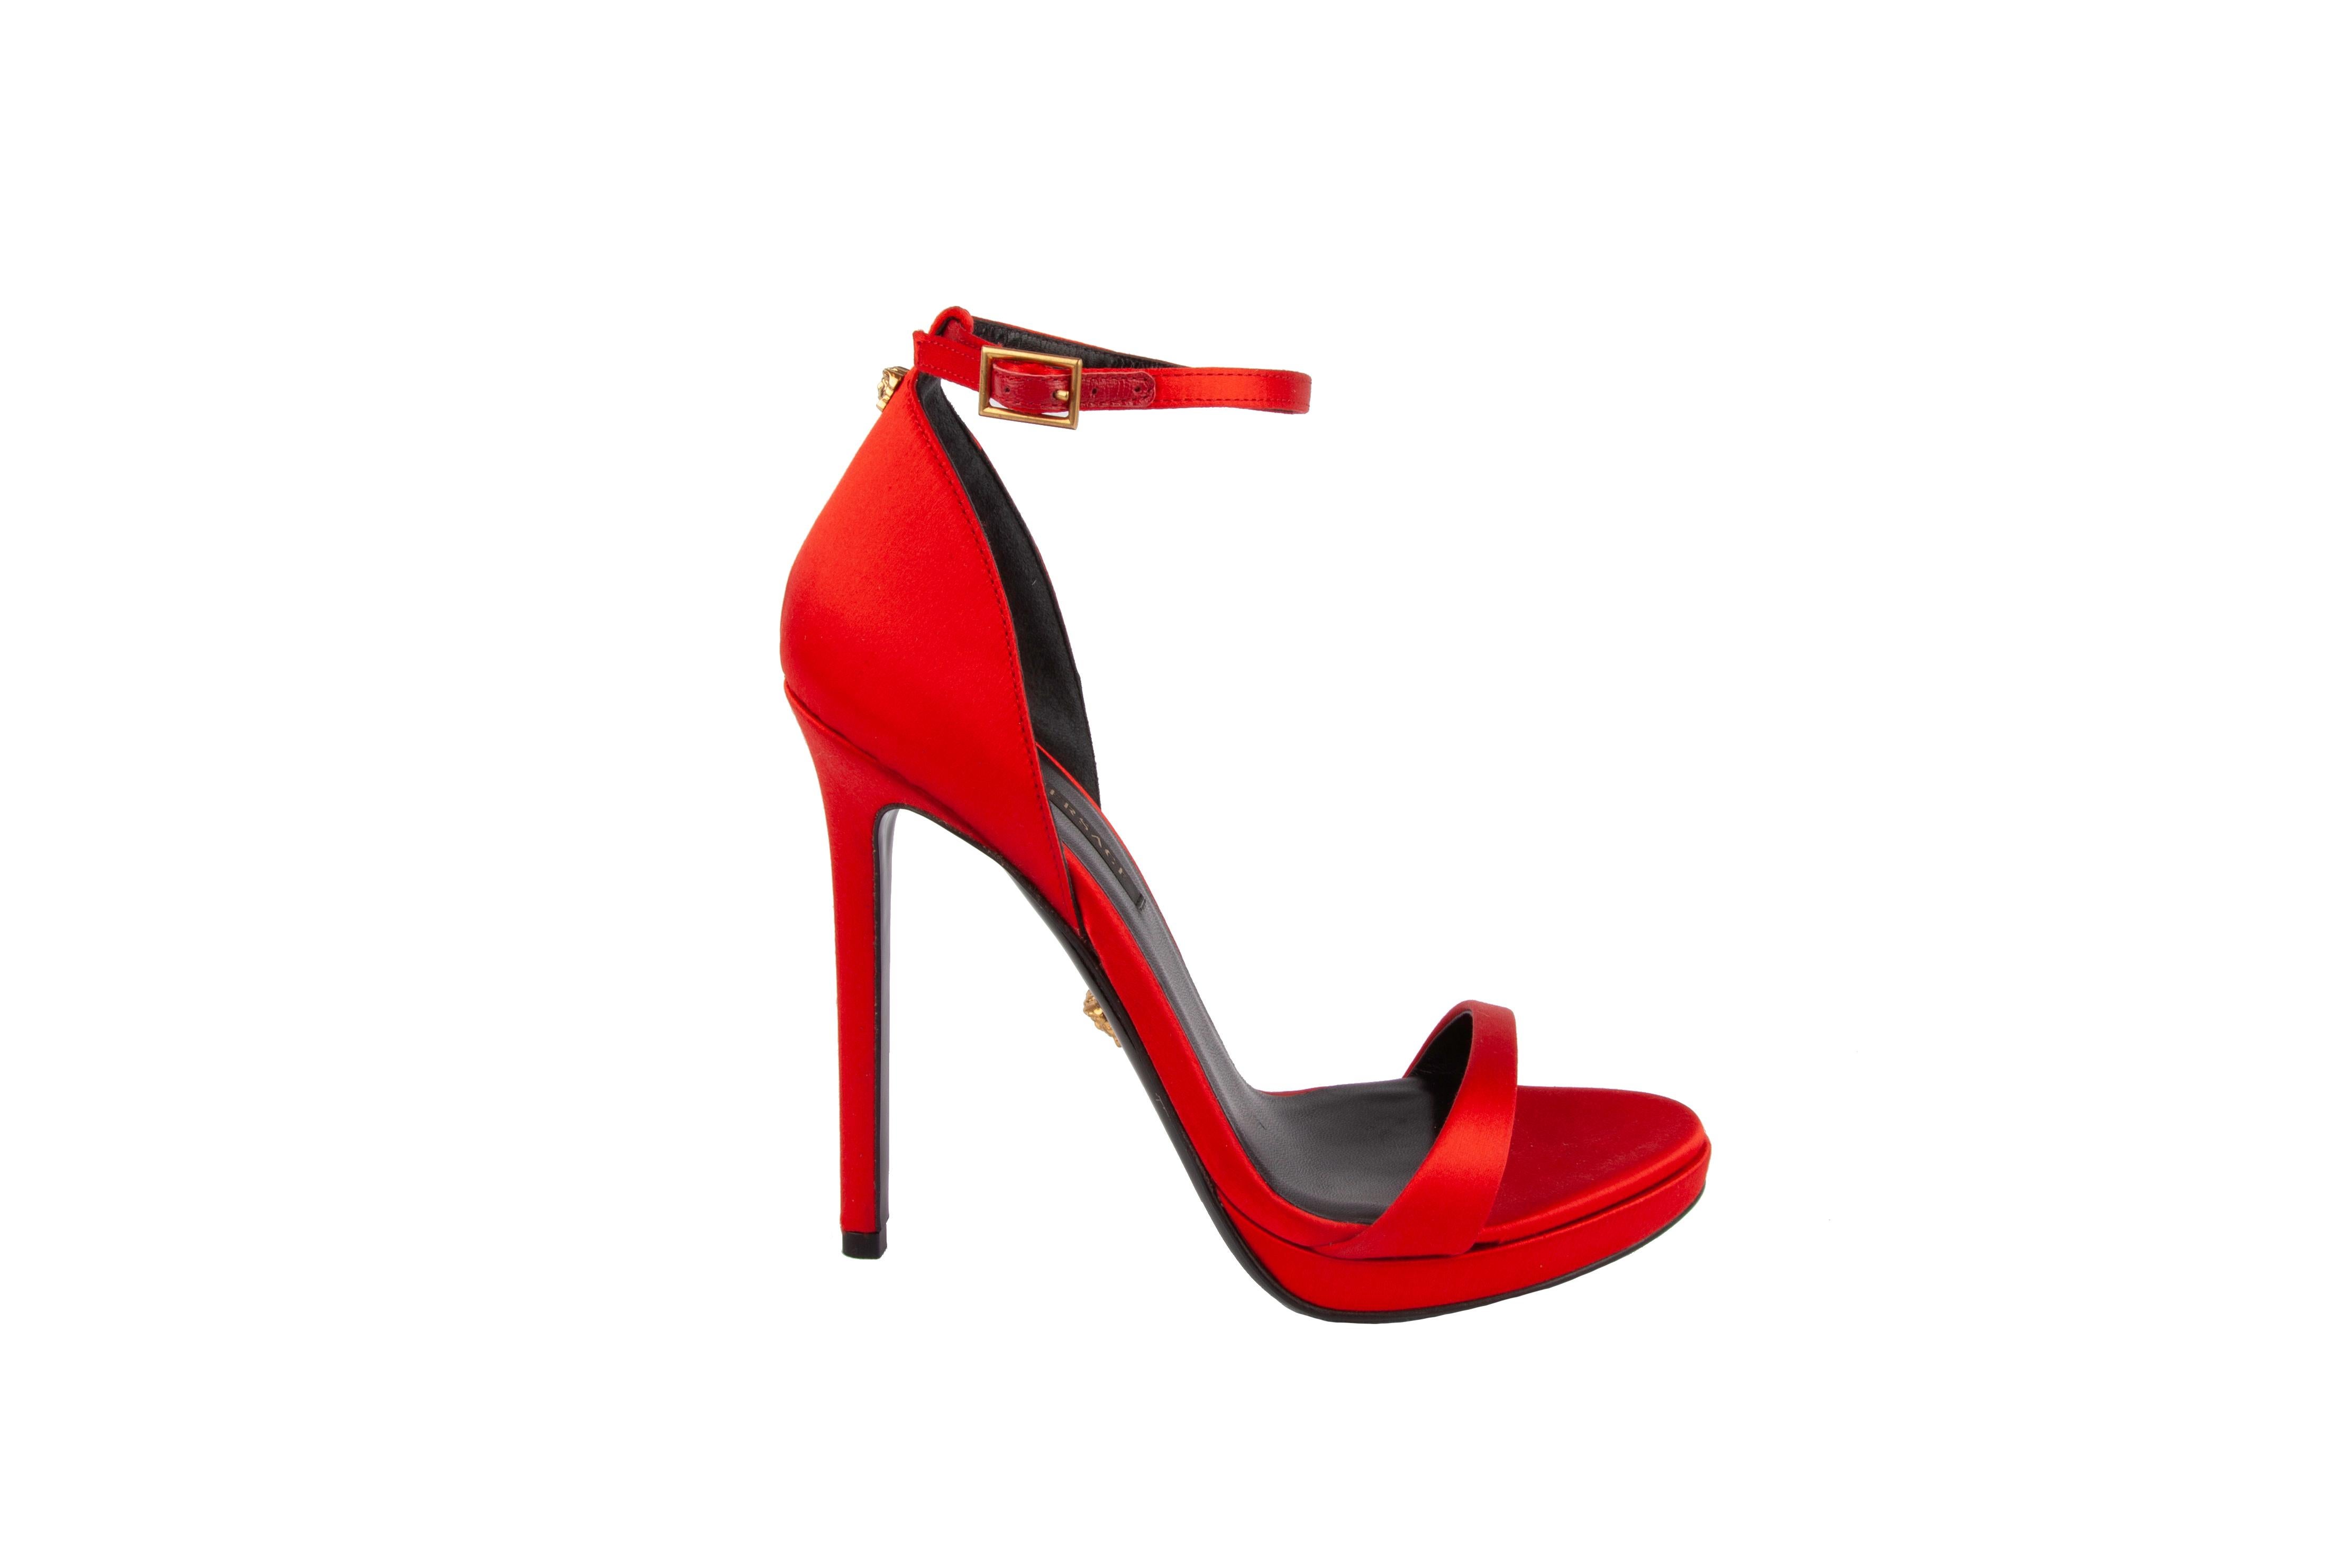 These Versace heels feature a luxurious red satin material, delicate straps, and gold tone hardware. They are a timeless, classic item that your closet needs. Brand new. Made in Italy.

Size: 37.5 (IT)

Material: Satin & Leather